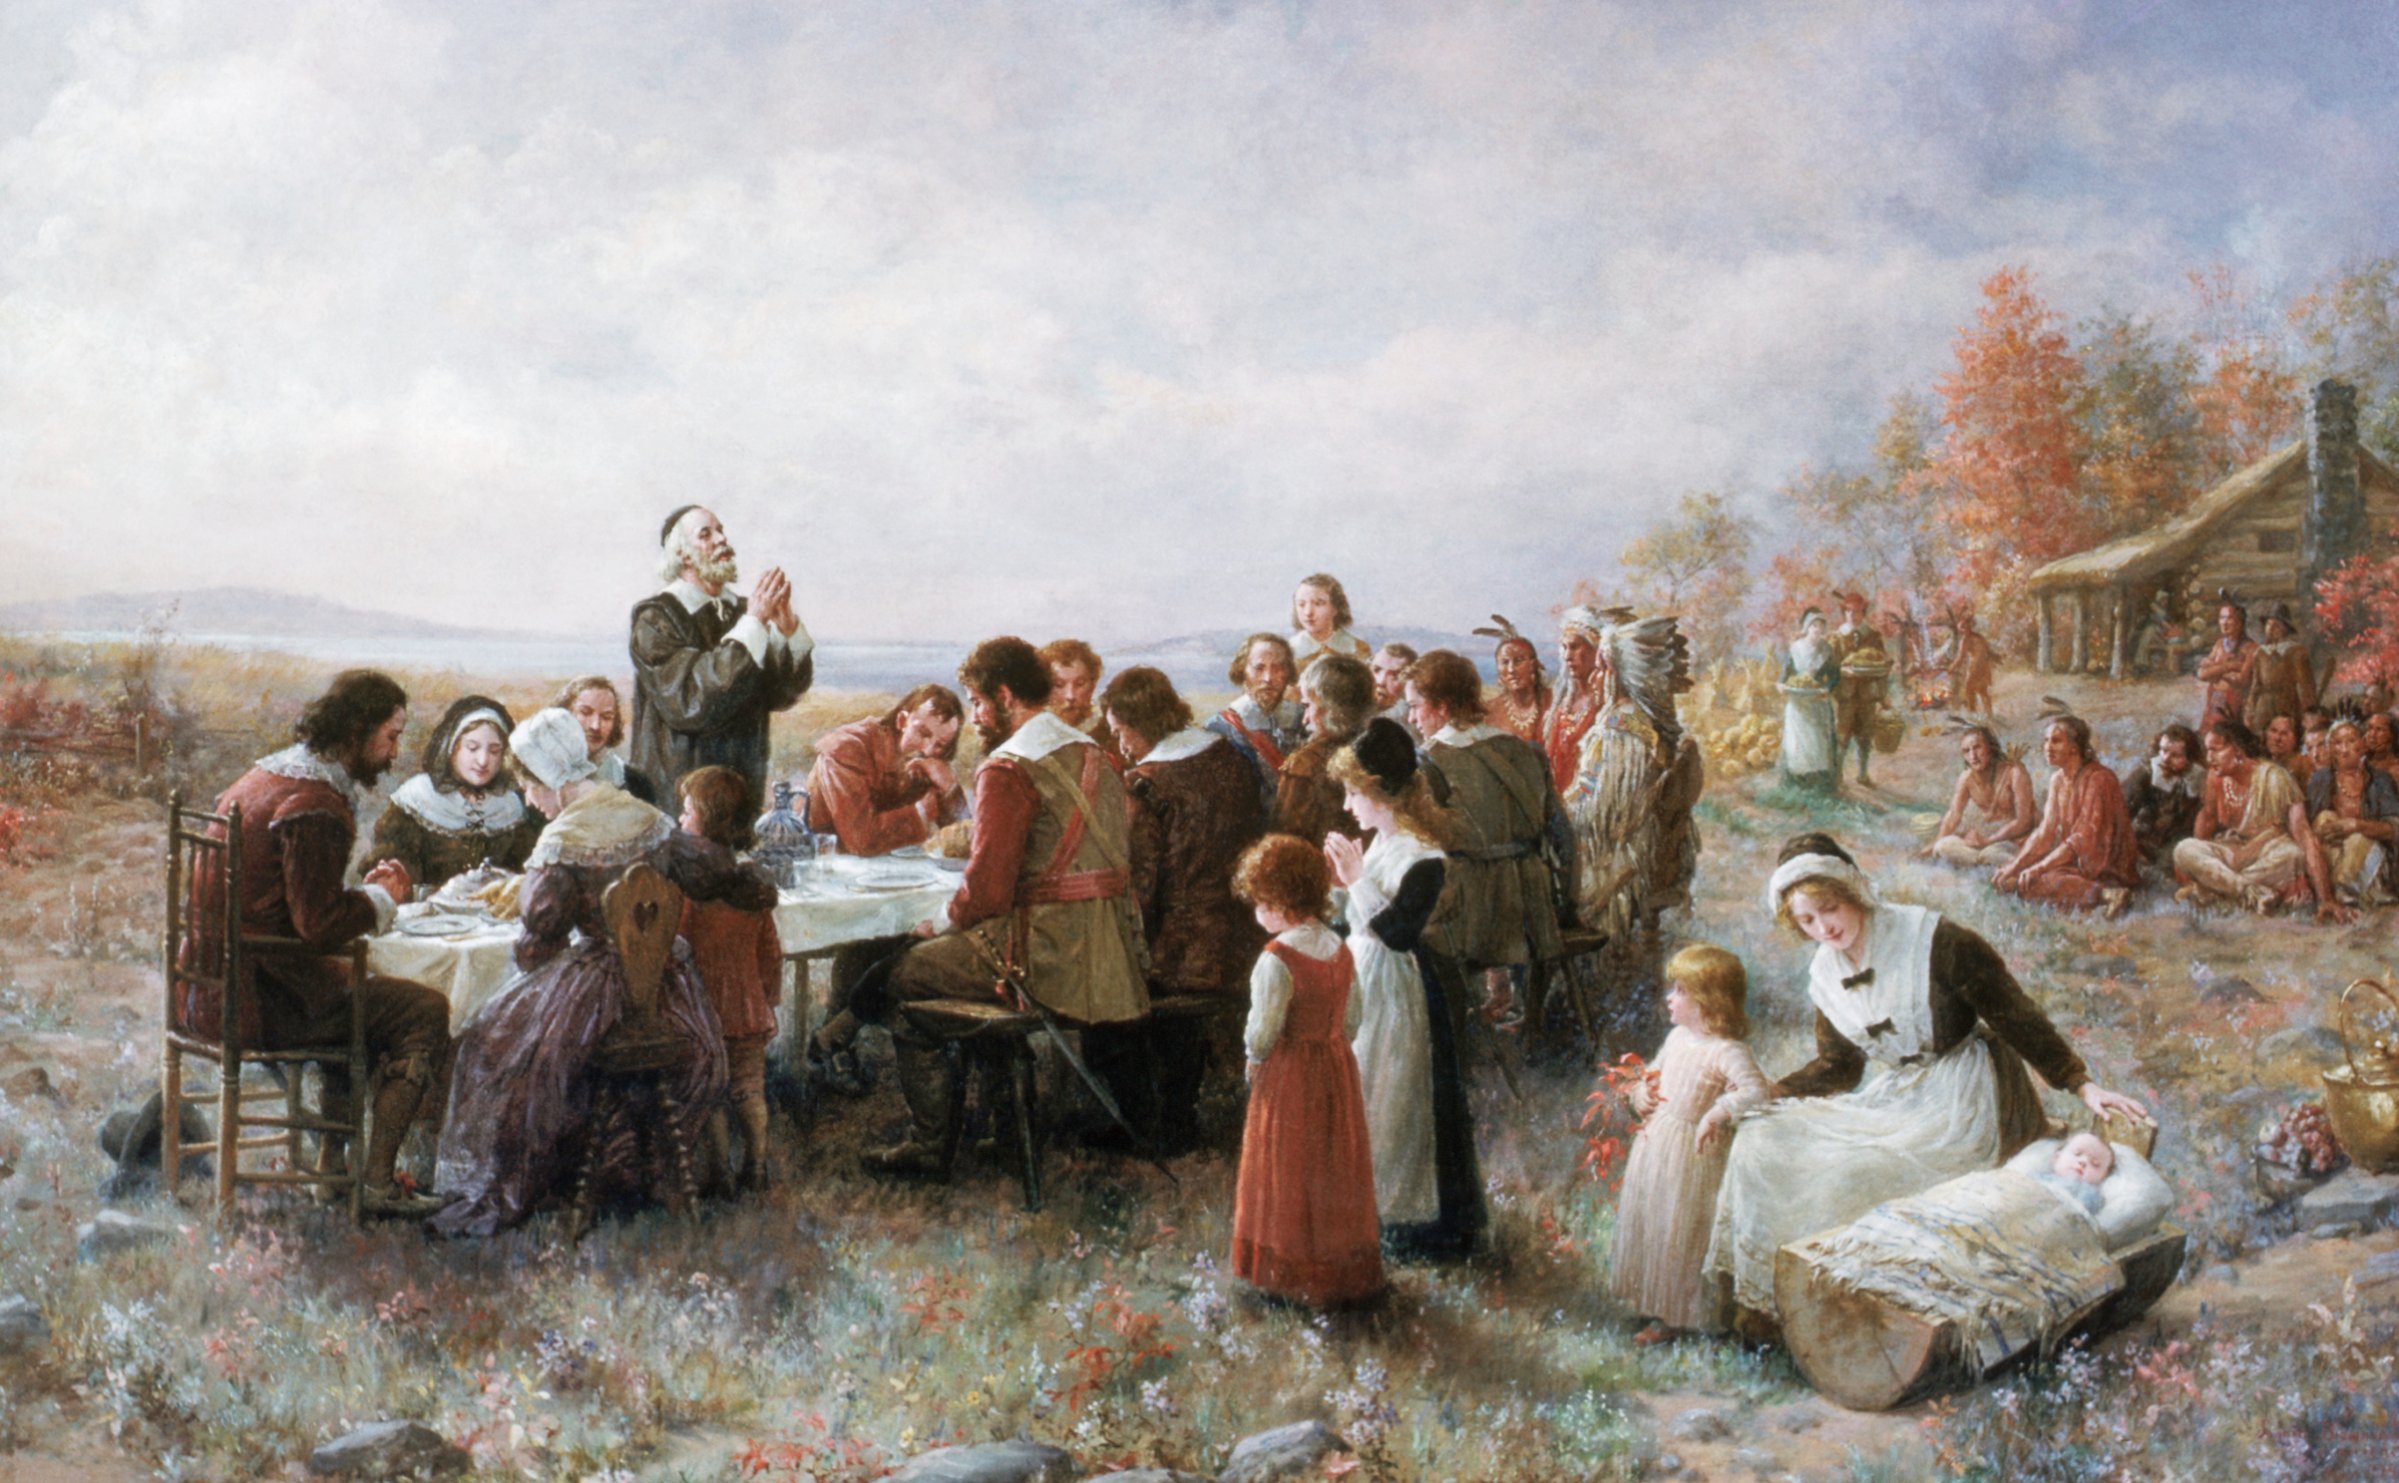 The First Thanksgiving by Jennie Augusta Brownscombe